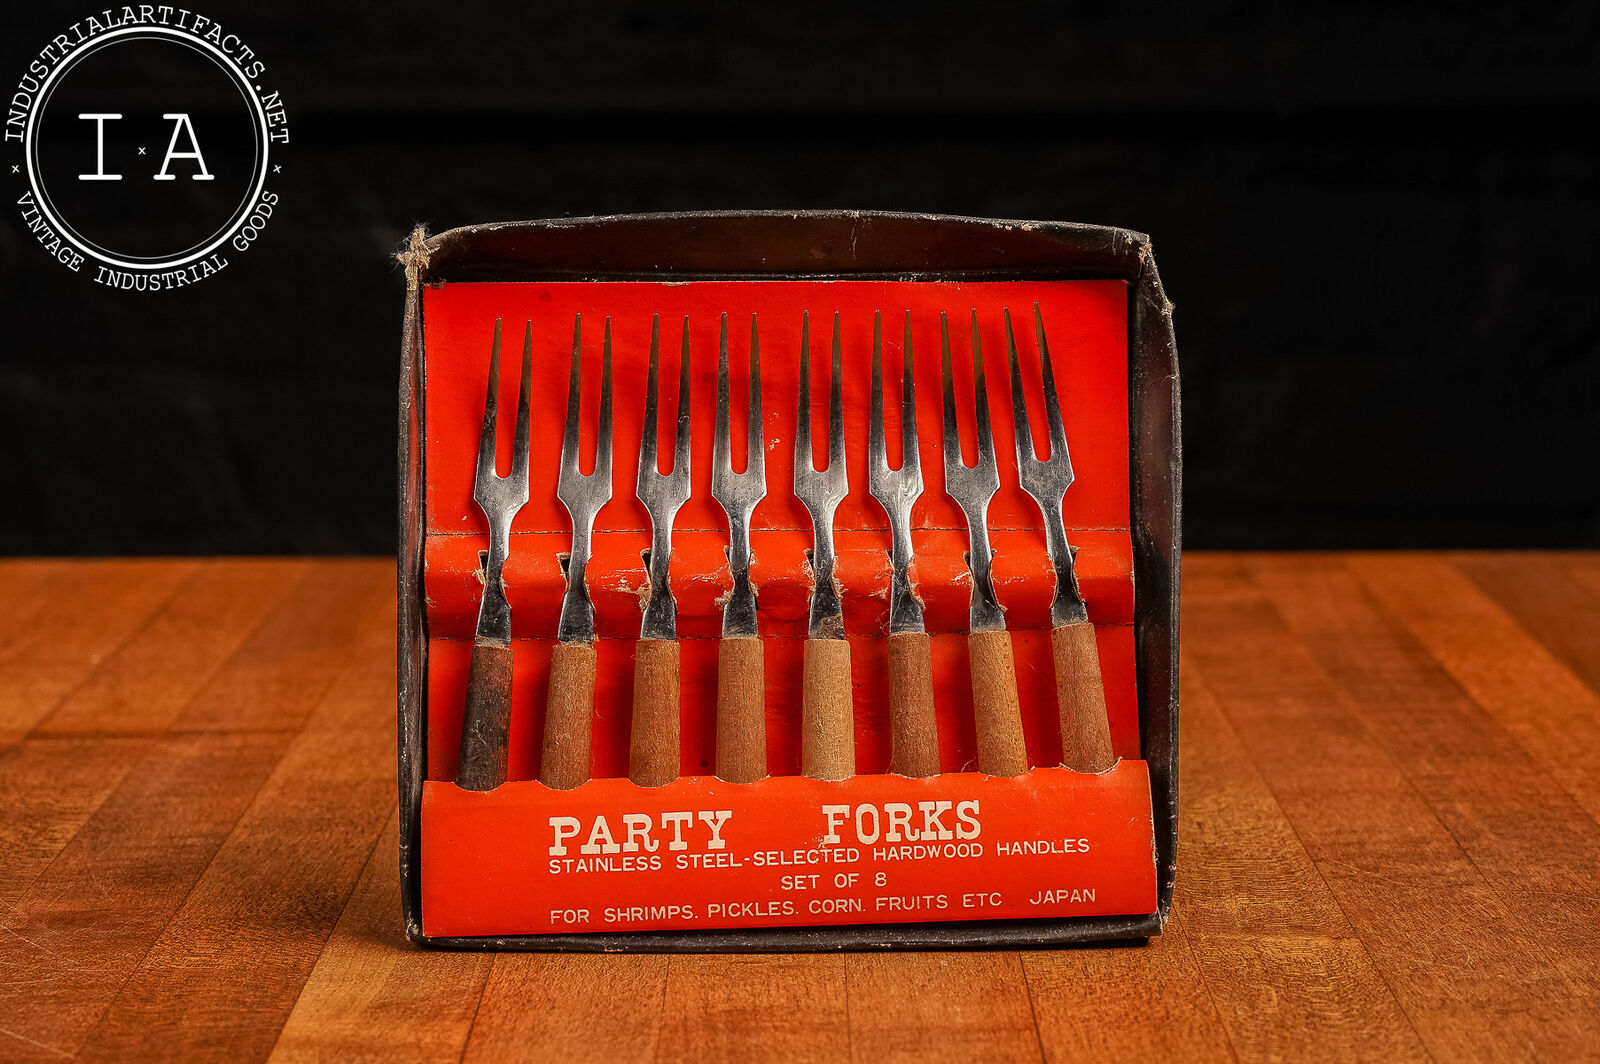 c.1960 Set of 8 Stainless Steel Party Forks